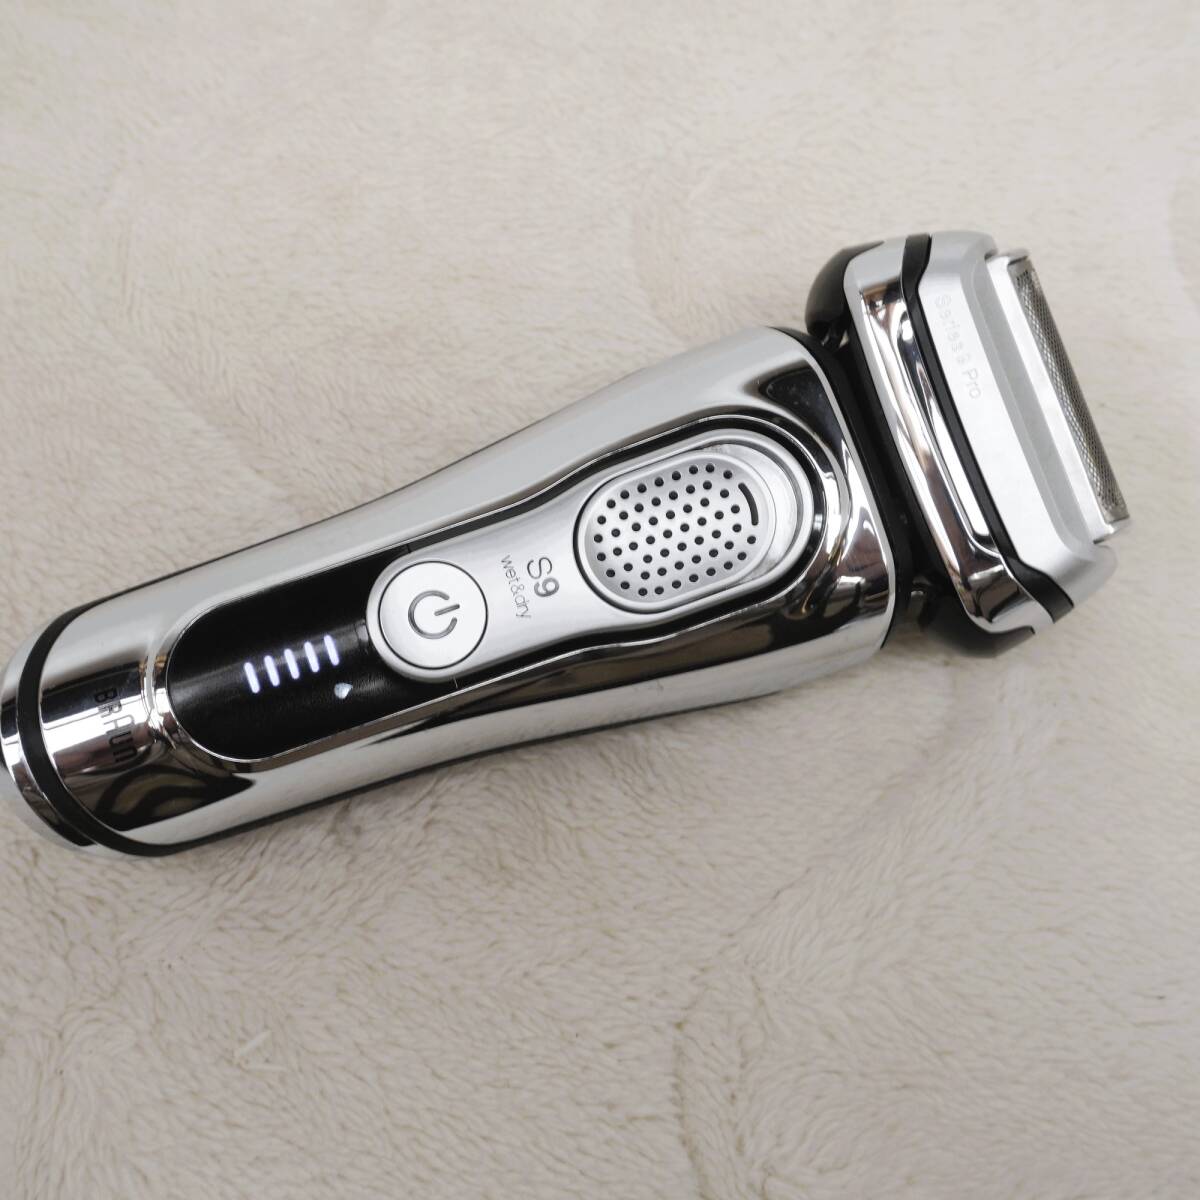 * Brown series 9 shaver washing vessel attaching (5430)Type 5791![ super-beauty goods ]!($Z4)